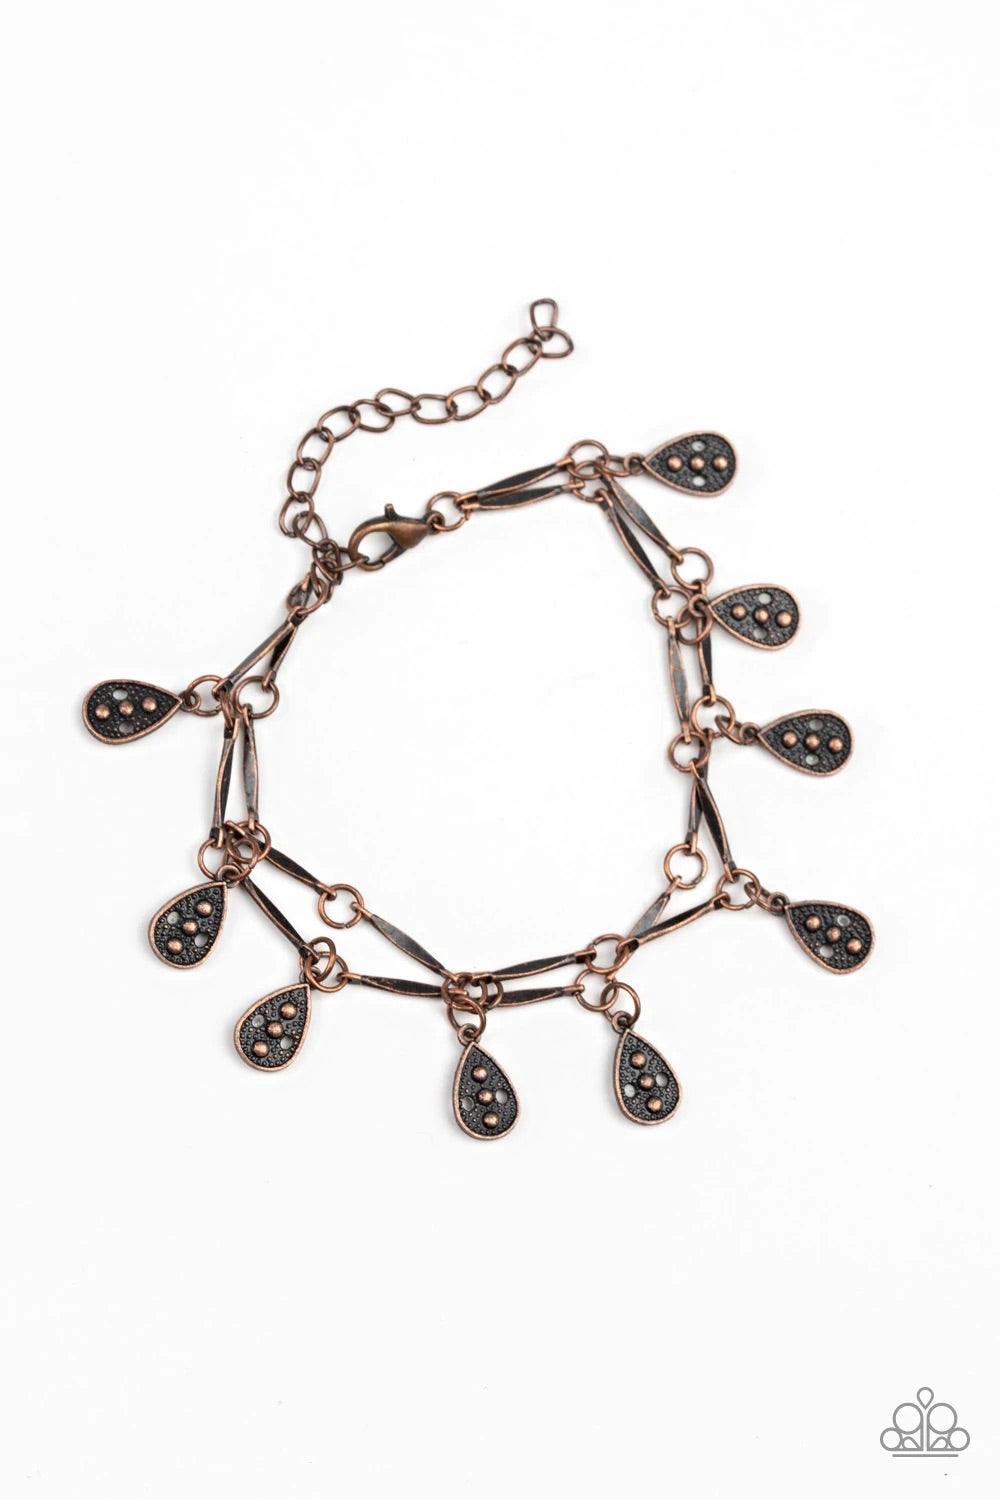 Paparazzi Accessories Gypsy Glee - Copper Glistening copper rods and ornate teardrops link around the wrist in two rows, creating a playful fringe. Features an adjustable clasp closure. Sold as one individual bracelet. Jewelry